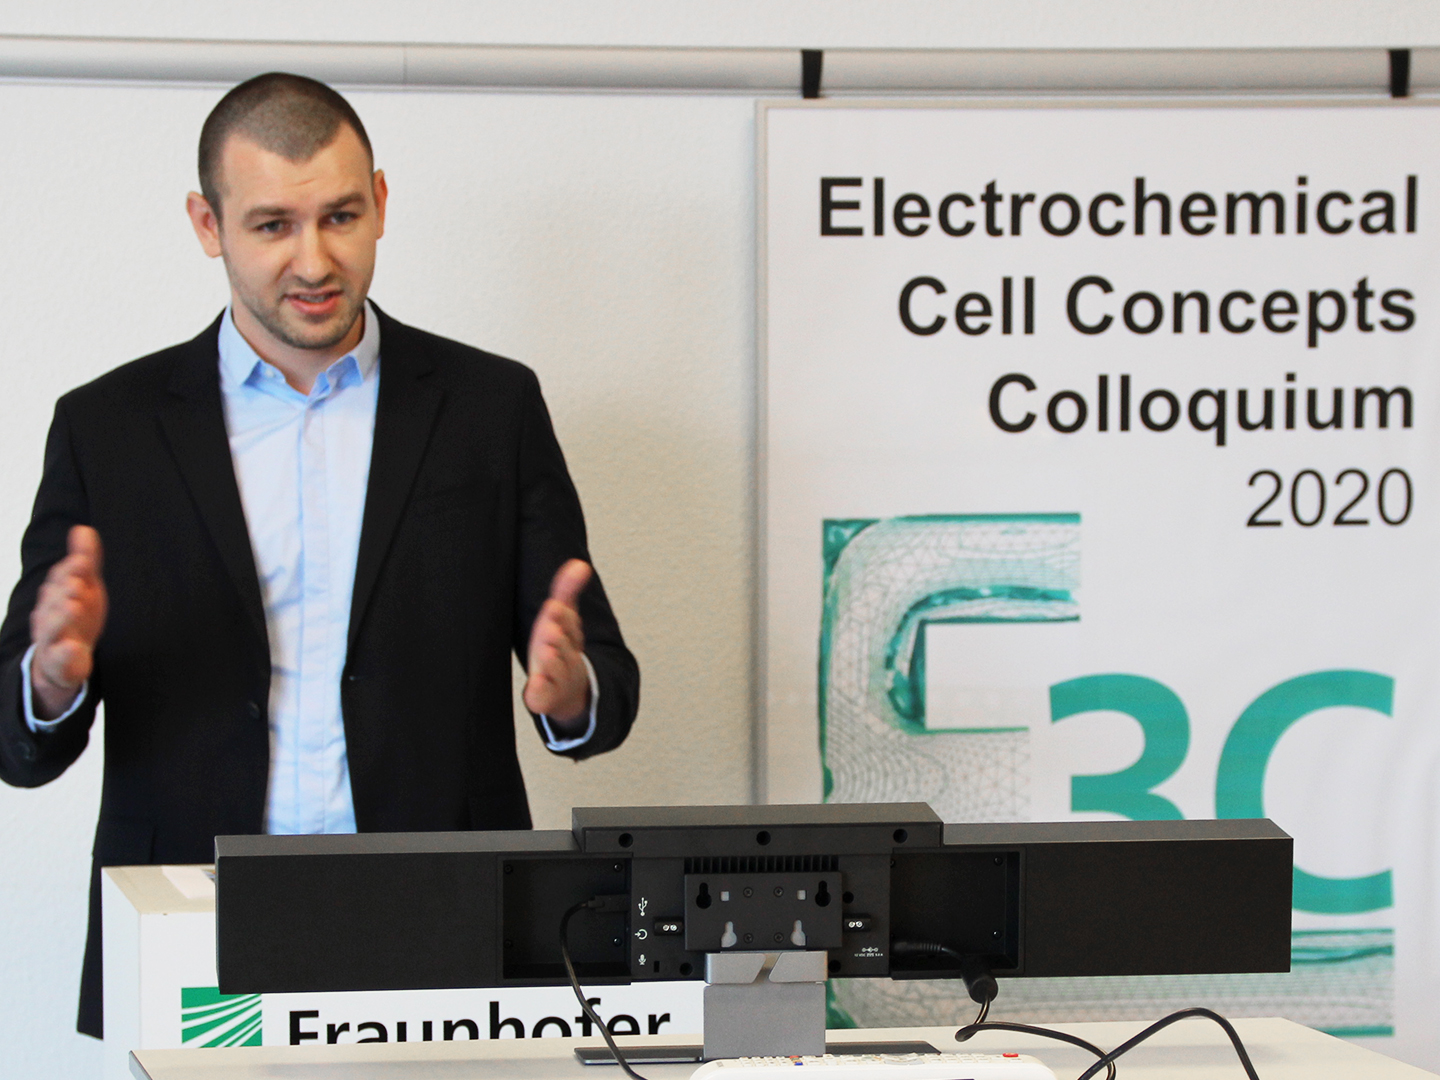 Jan Girschik, organizer of the virtual ˮElectrochemical Cell Concepts Colloquiumˮ, opened the event.